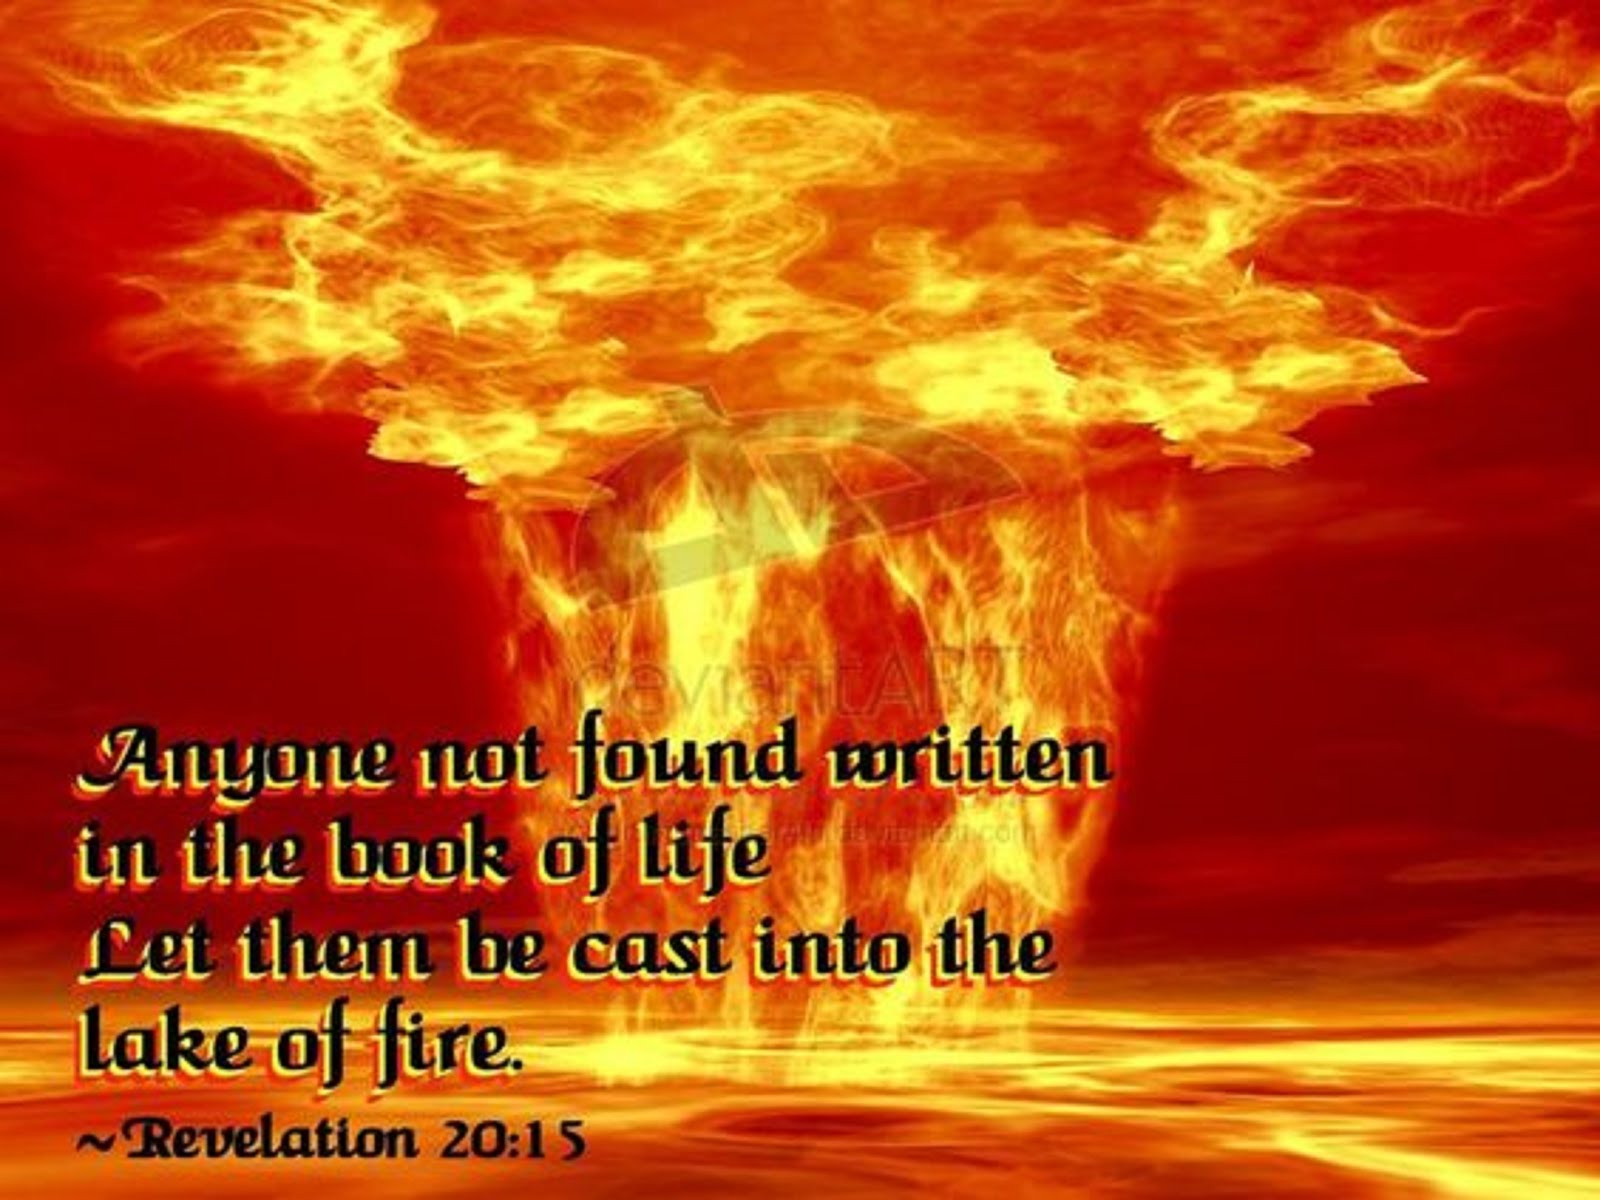 LET HIM WHO IS NOT FOUND WRITTEN IN THE BOOK OF LIFE BE THROWN INTO THE LAKE OF FIRE